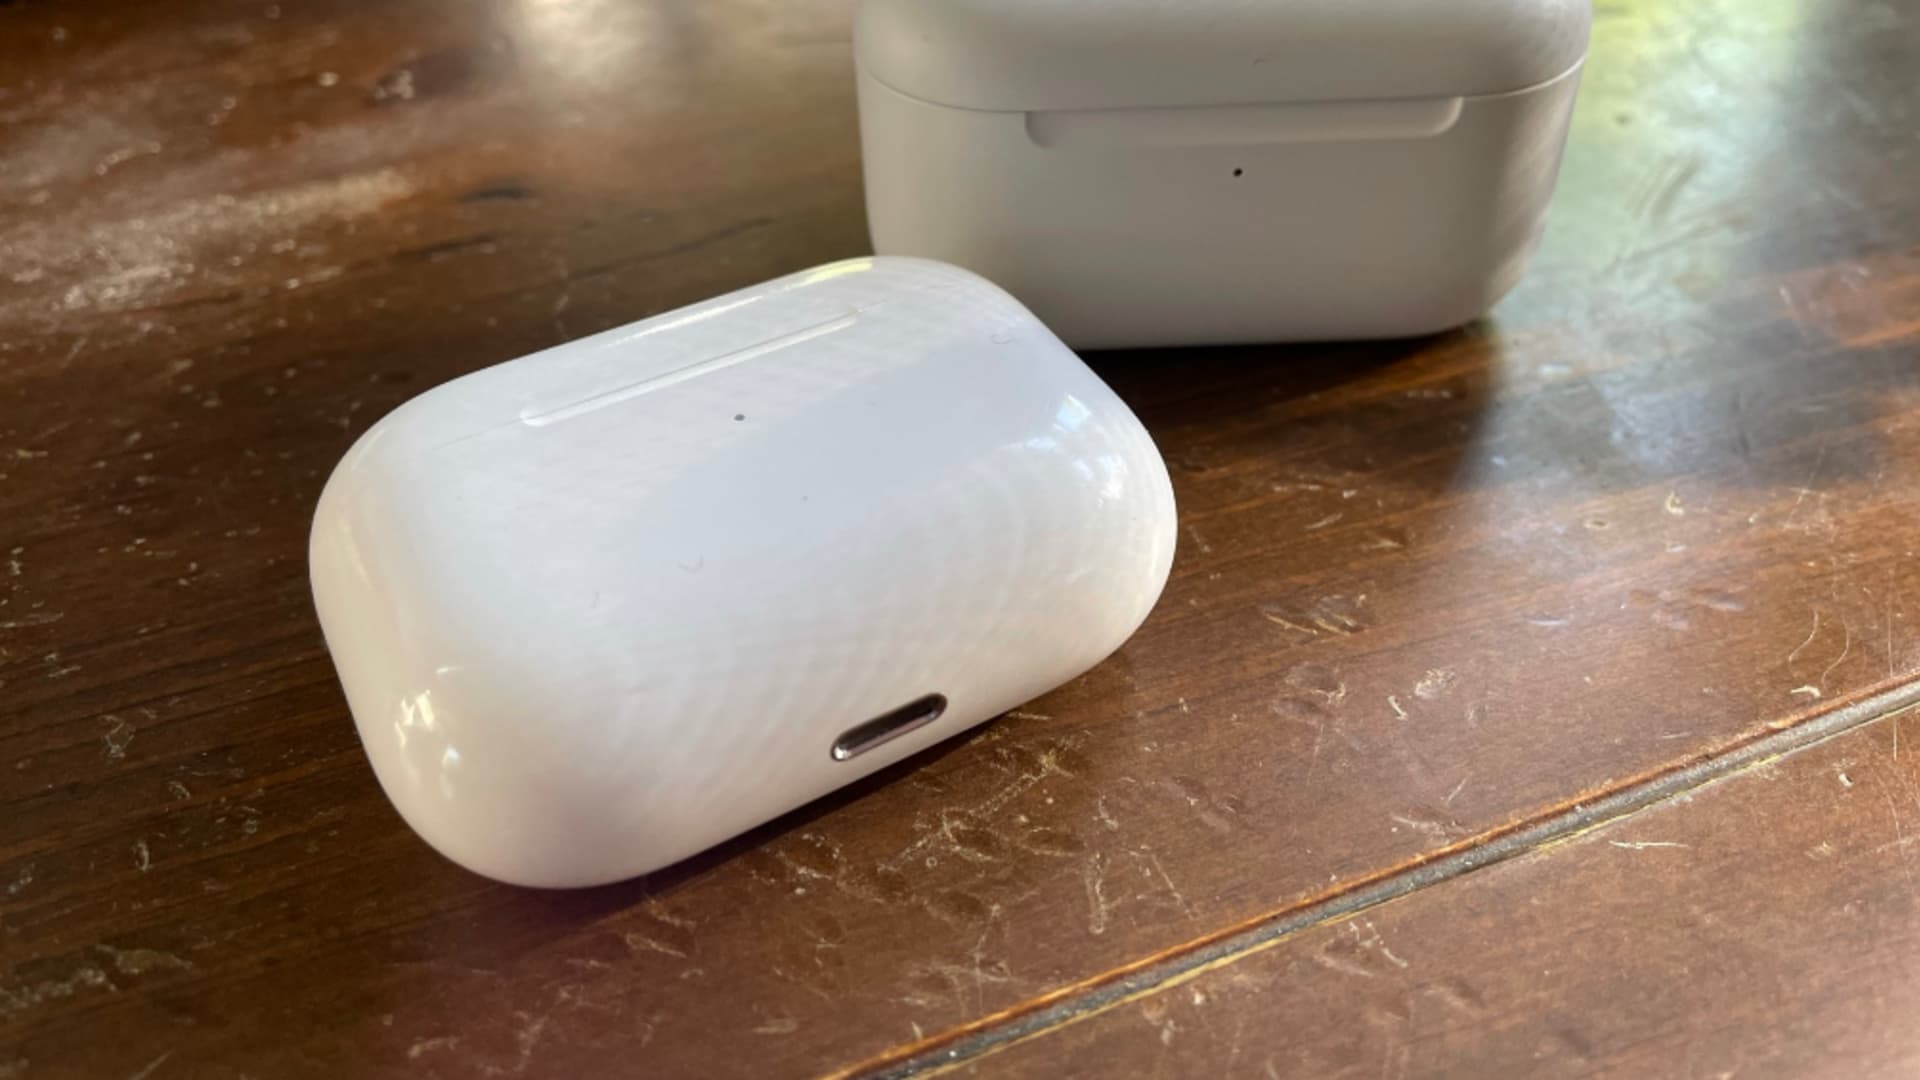 AirPods Pro case and Amazon Echo Buds case.